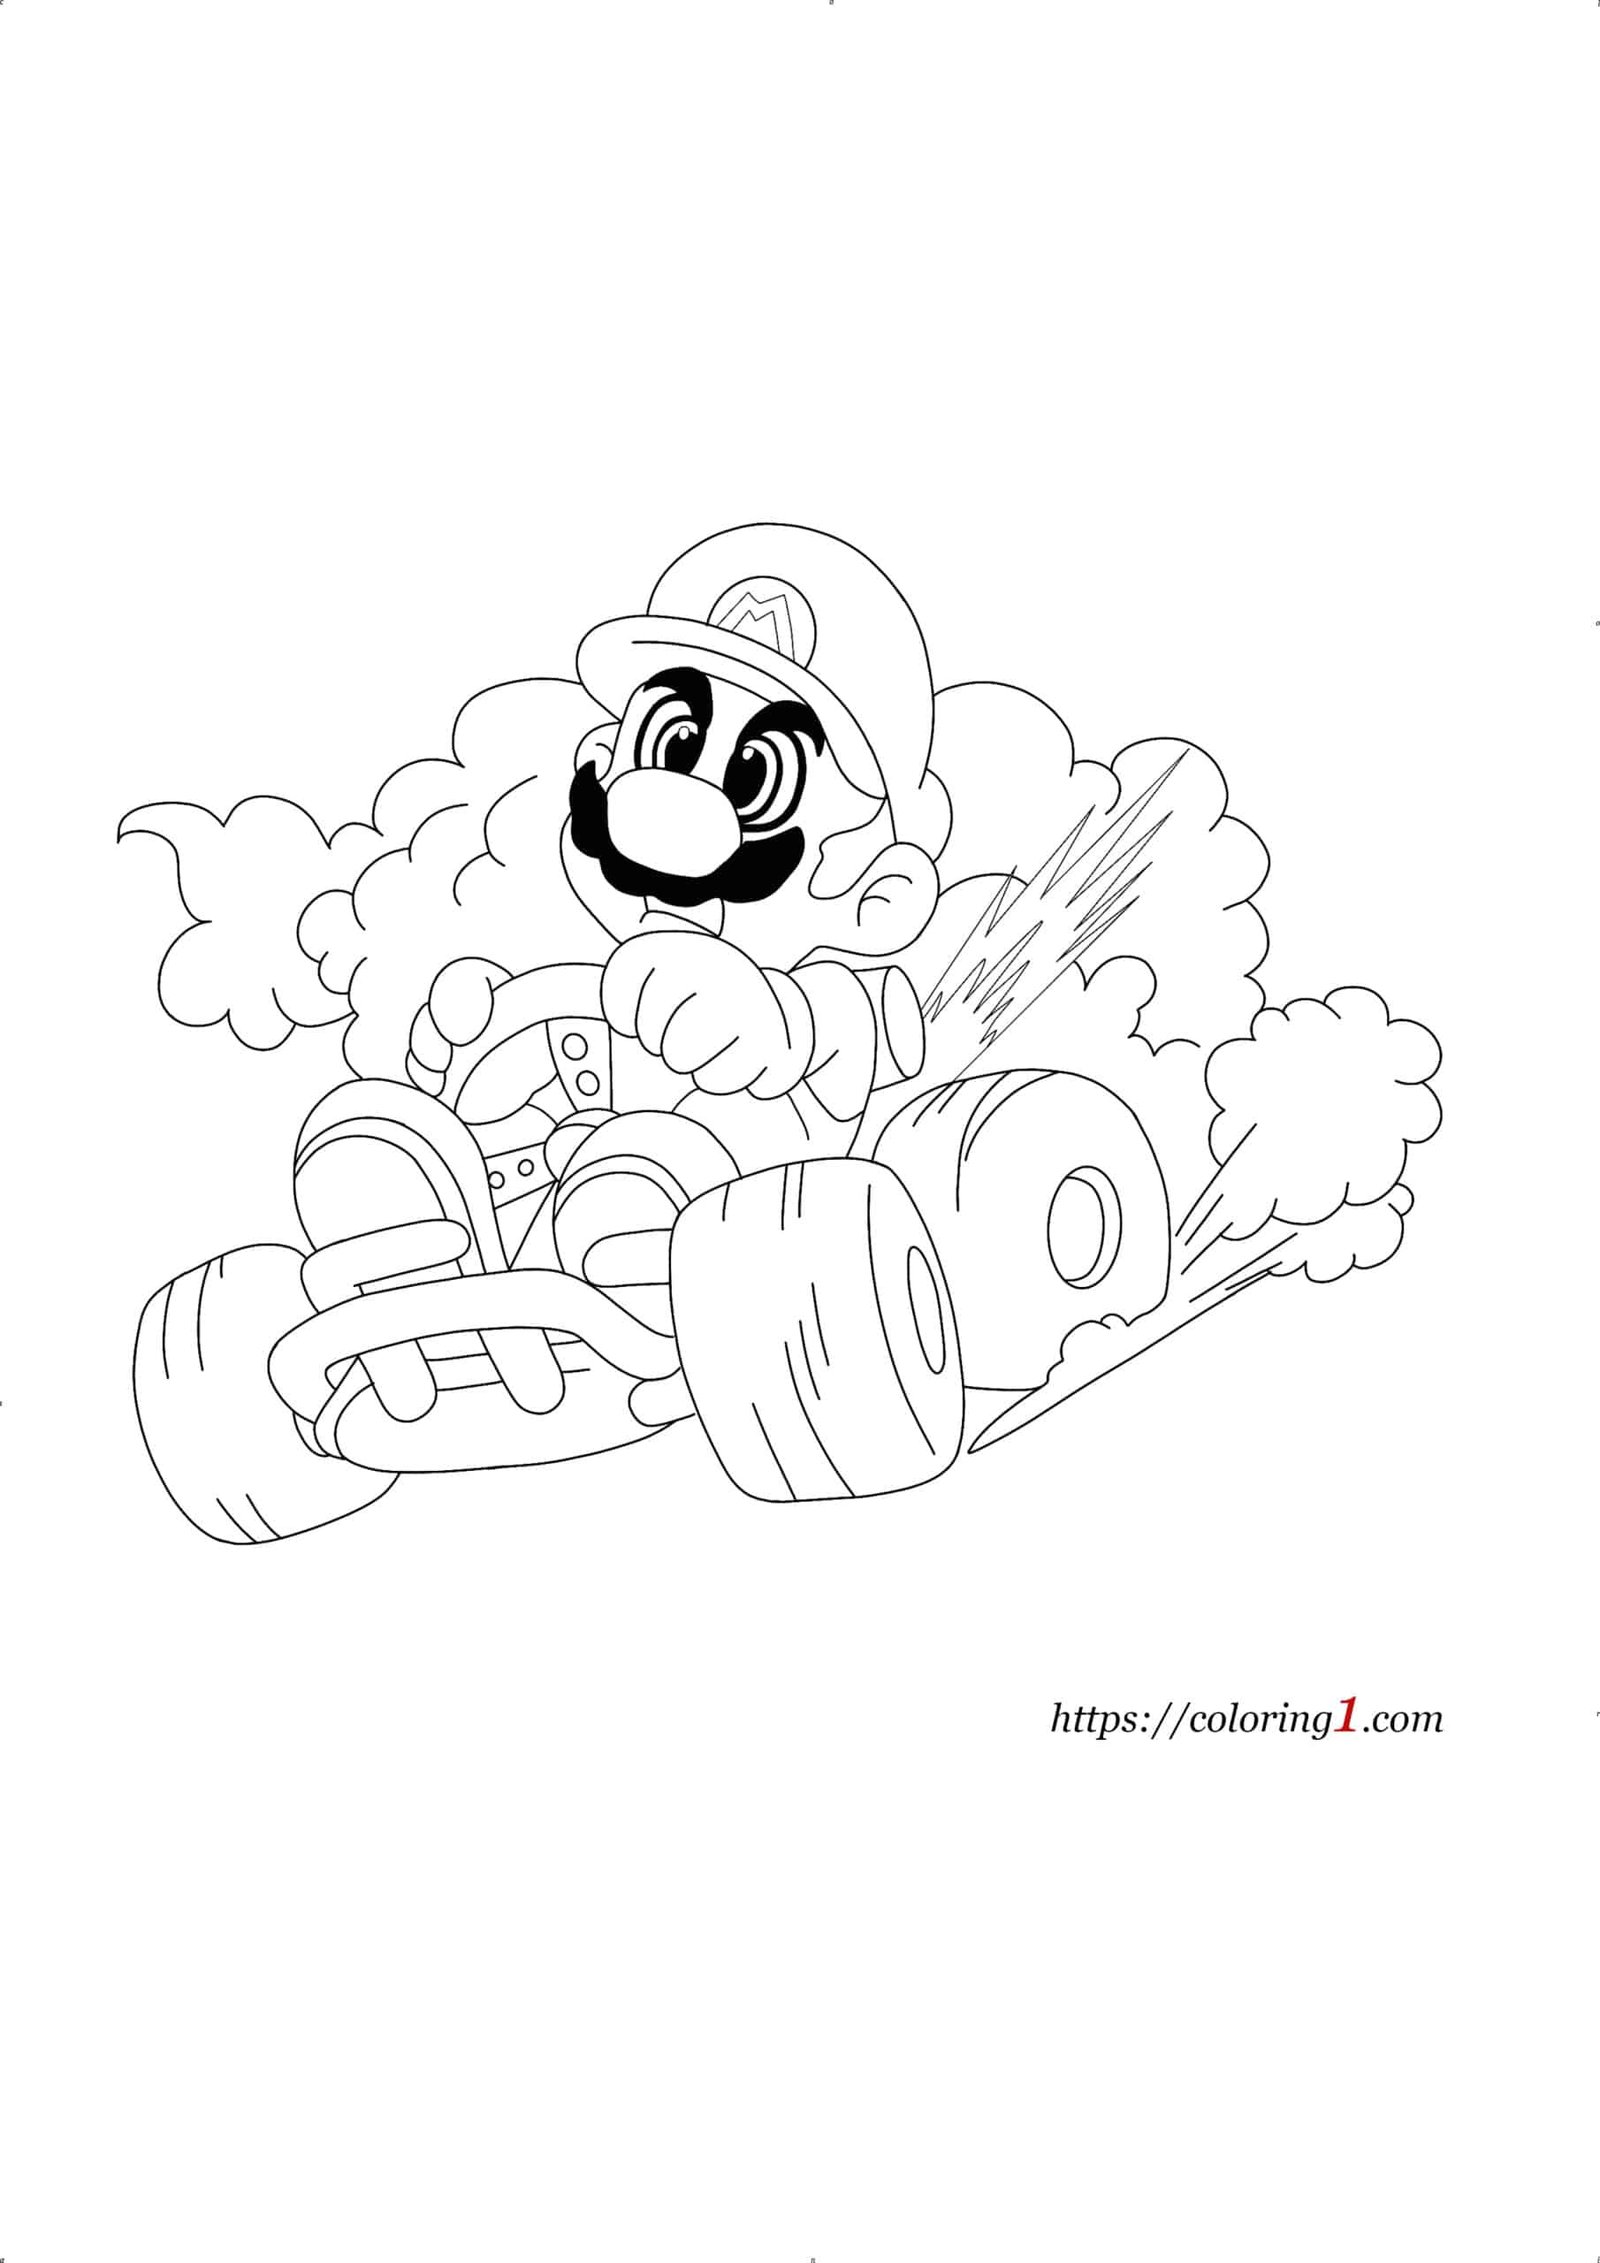 Mario Kart coloring page to print for kids